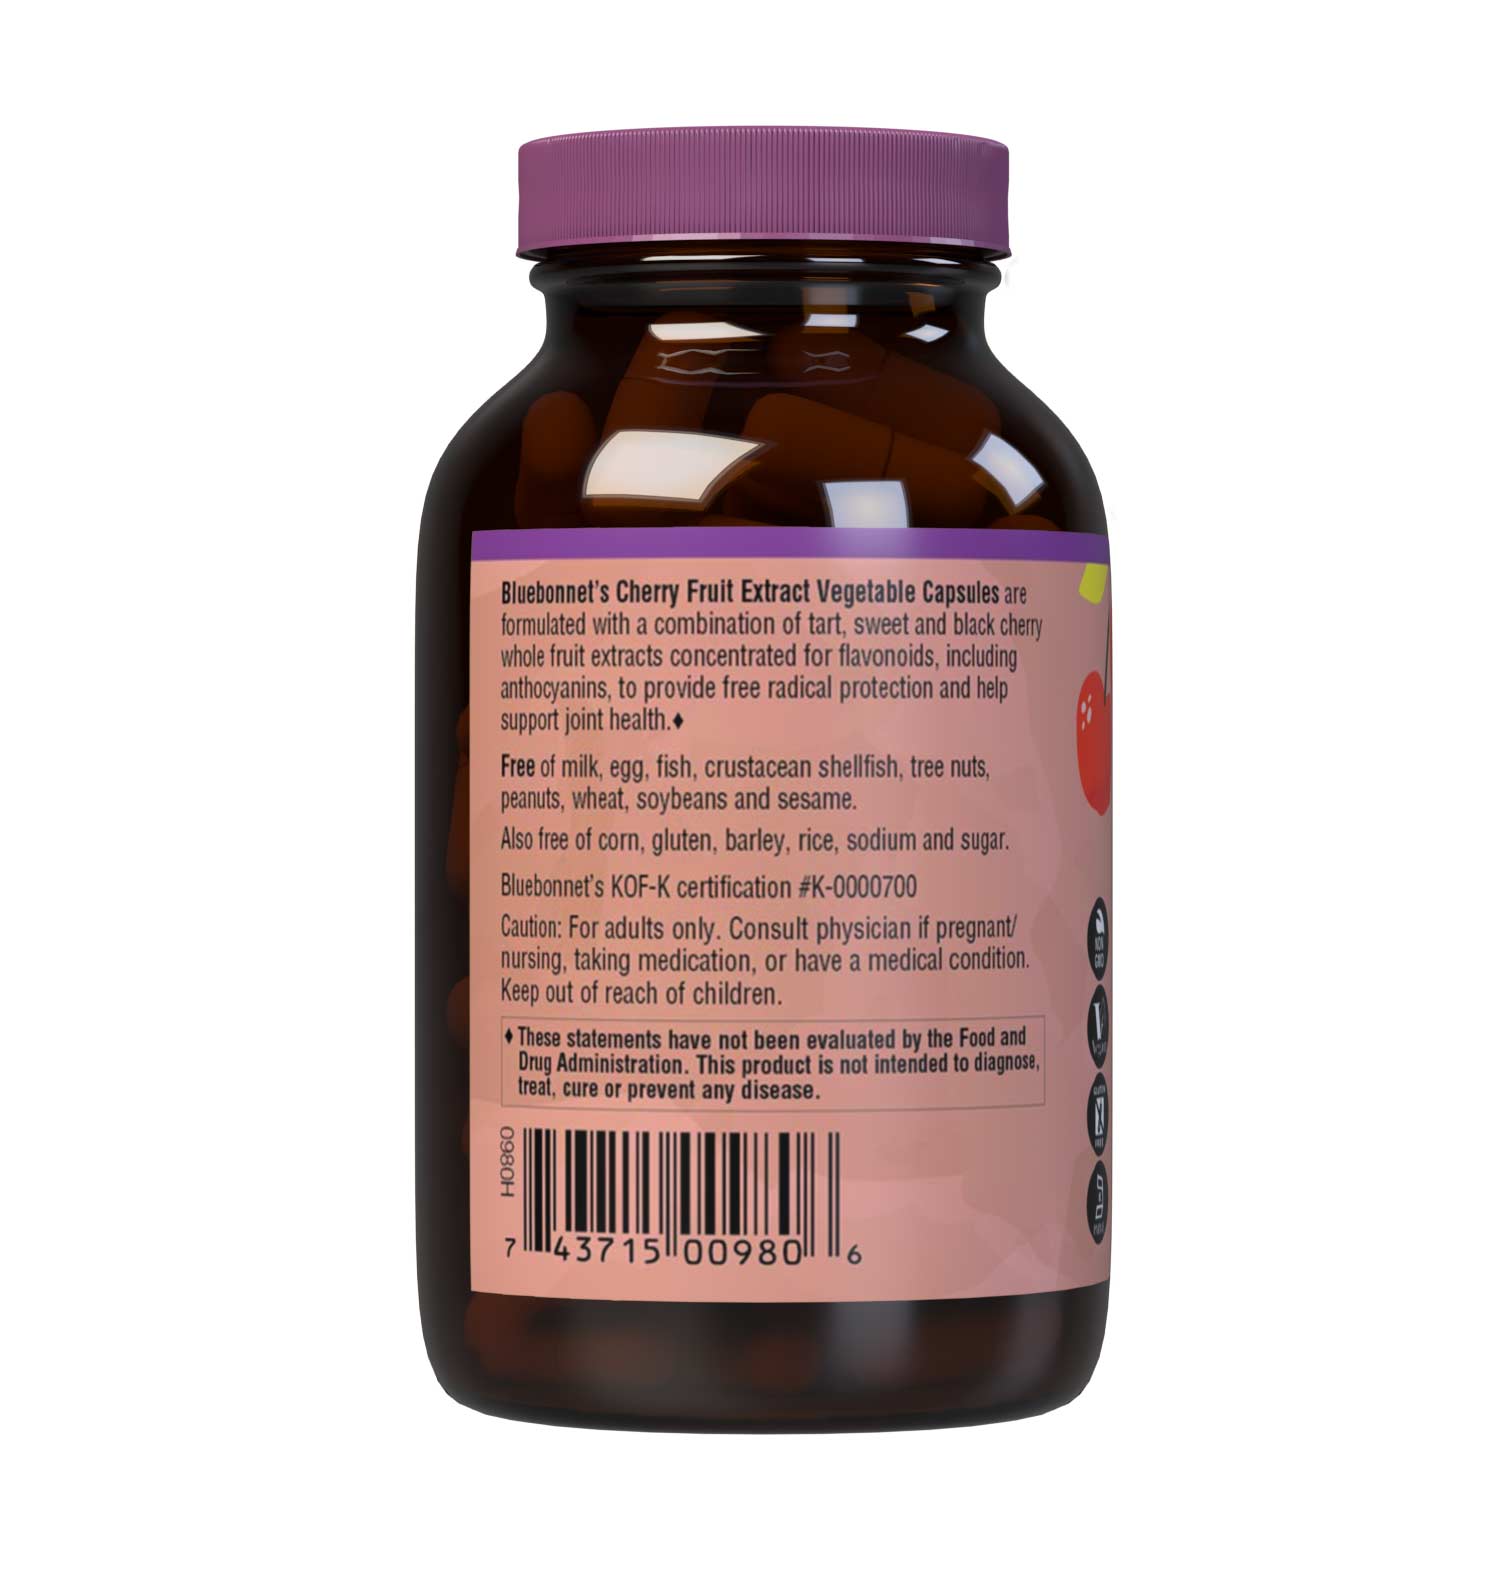 Bluebonnet's Cherry Fruit Extract 60 Vegetable Capsules are formulated with a combination of tart, sweet and black cherry to provide free radical protection and support joint health. Description panel. #size_60 count